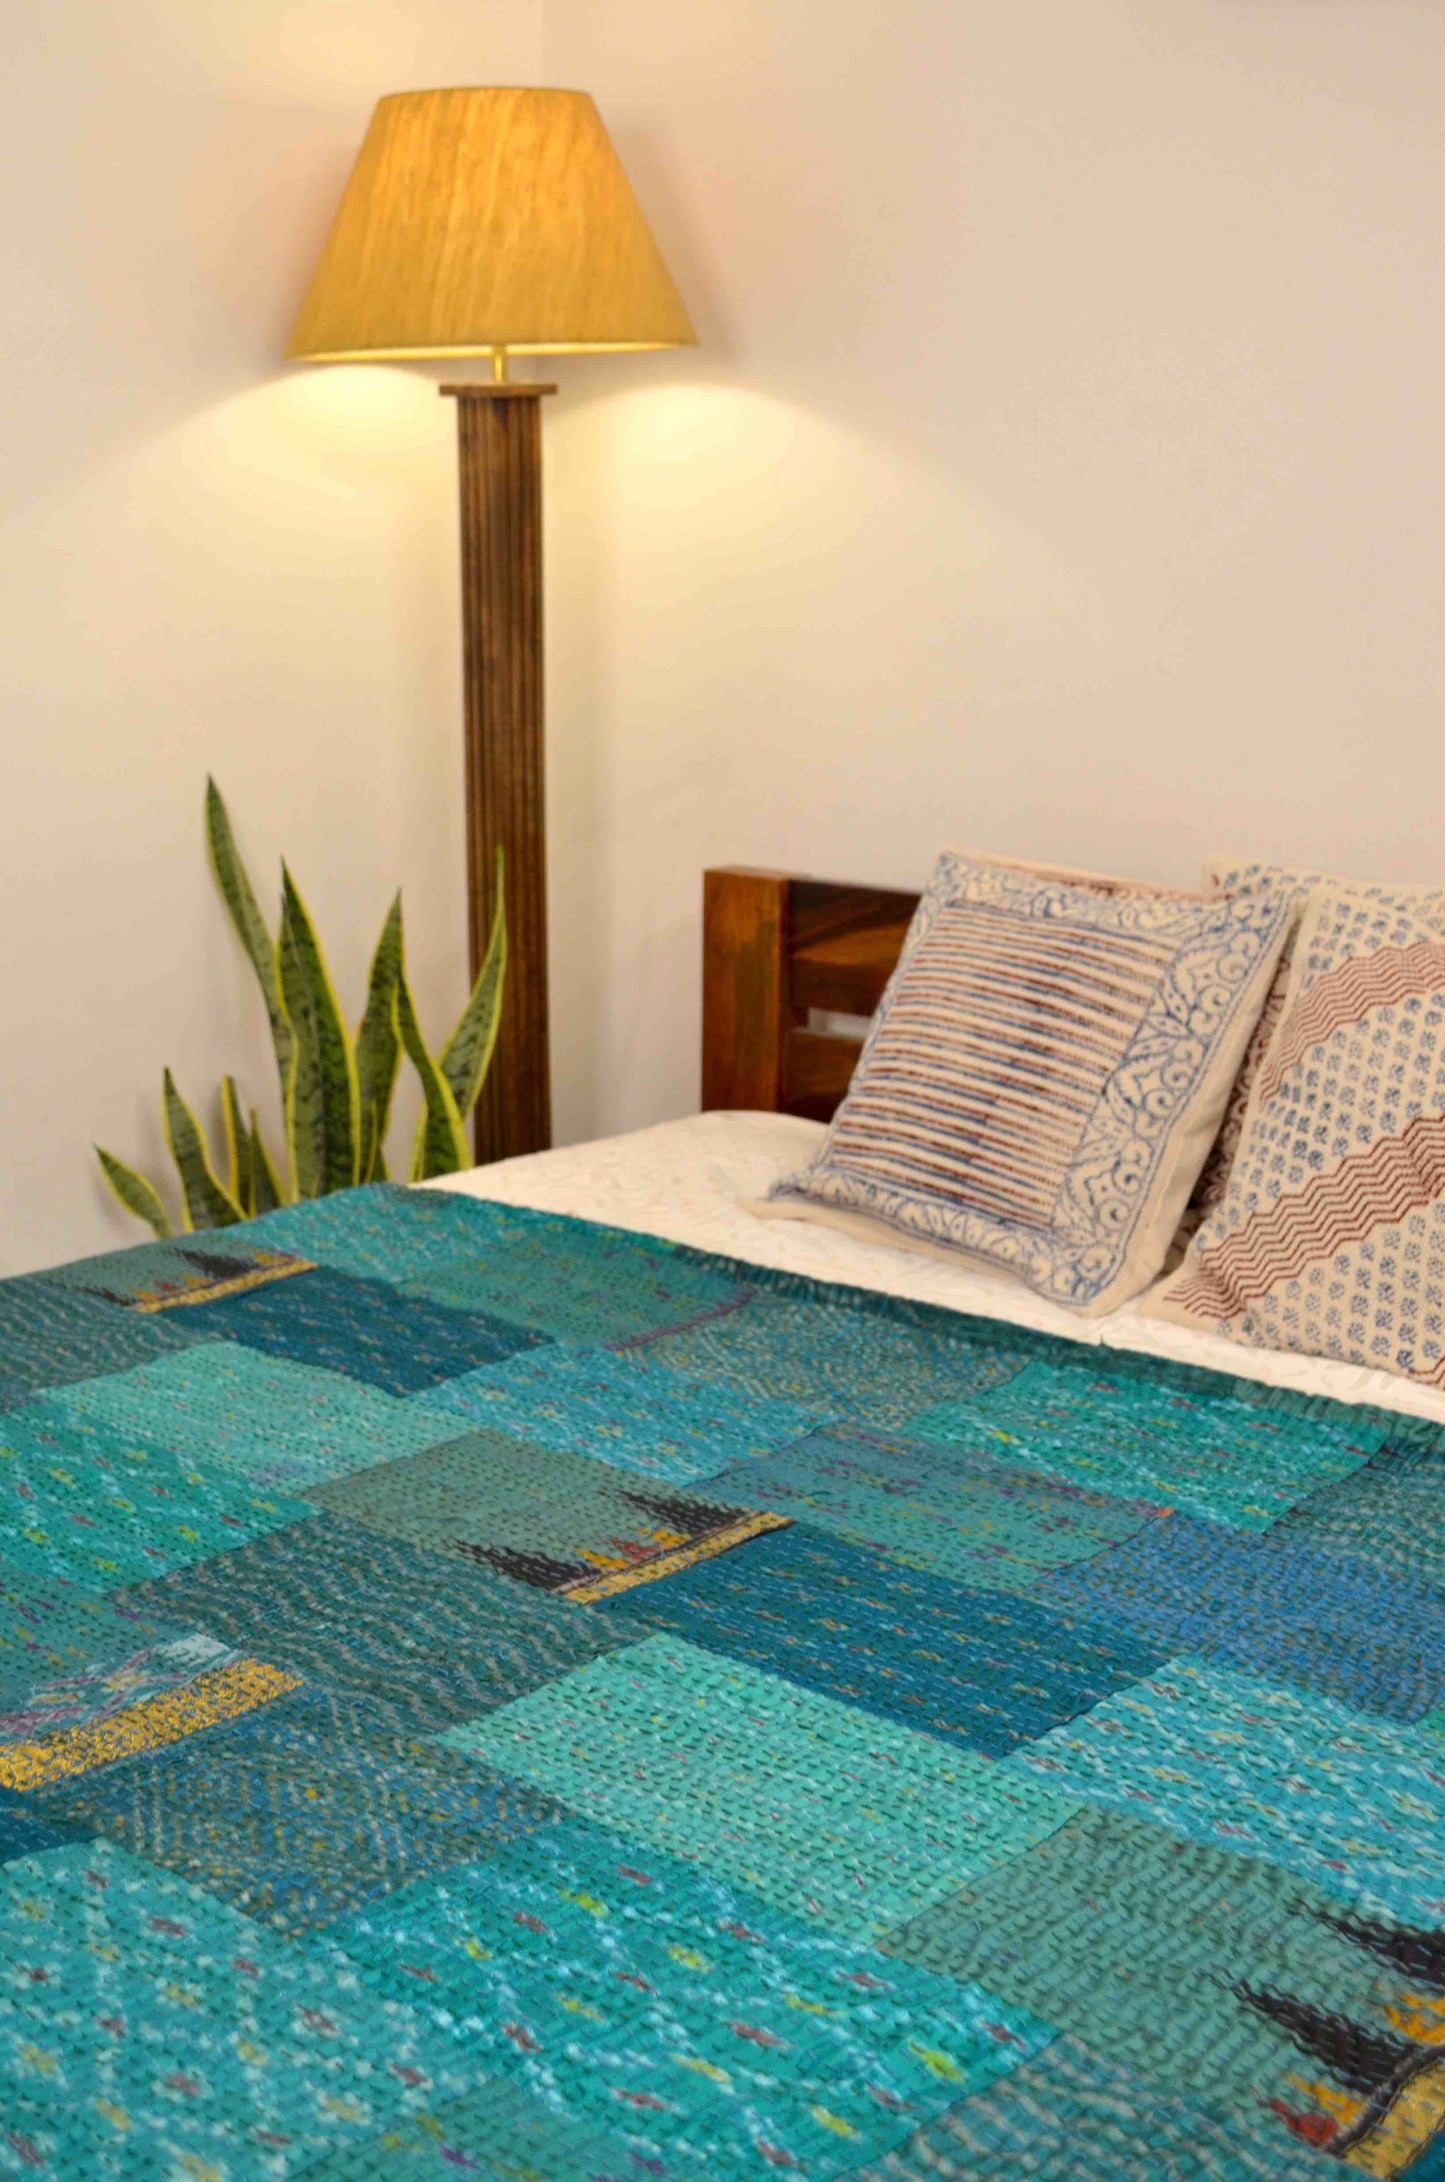 Shades Of Teal Patchwork Hand Embroidered Silk Bedspread